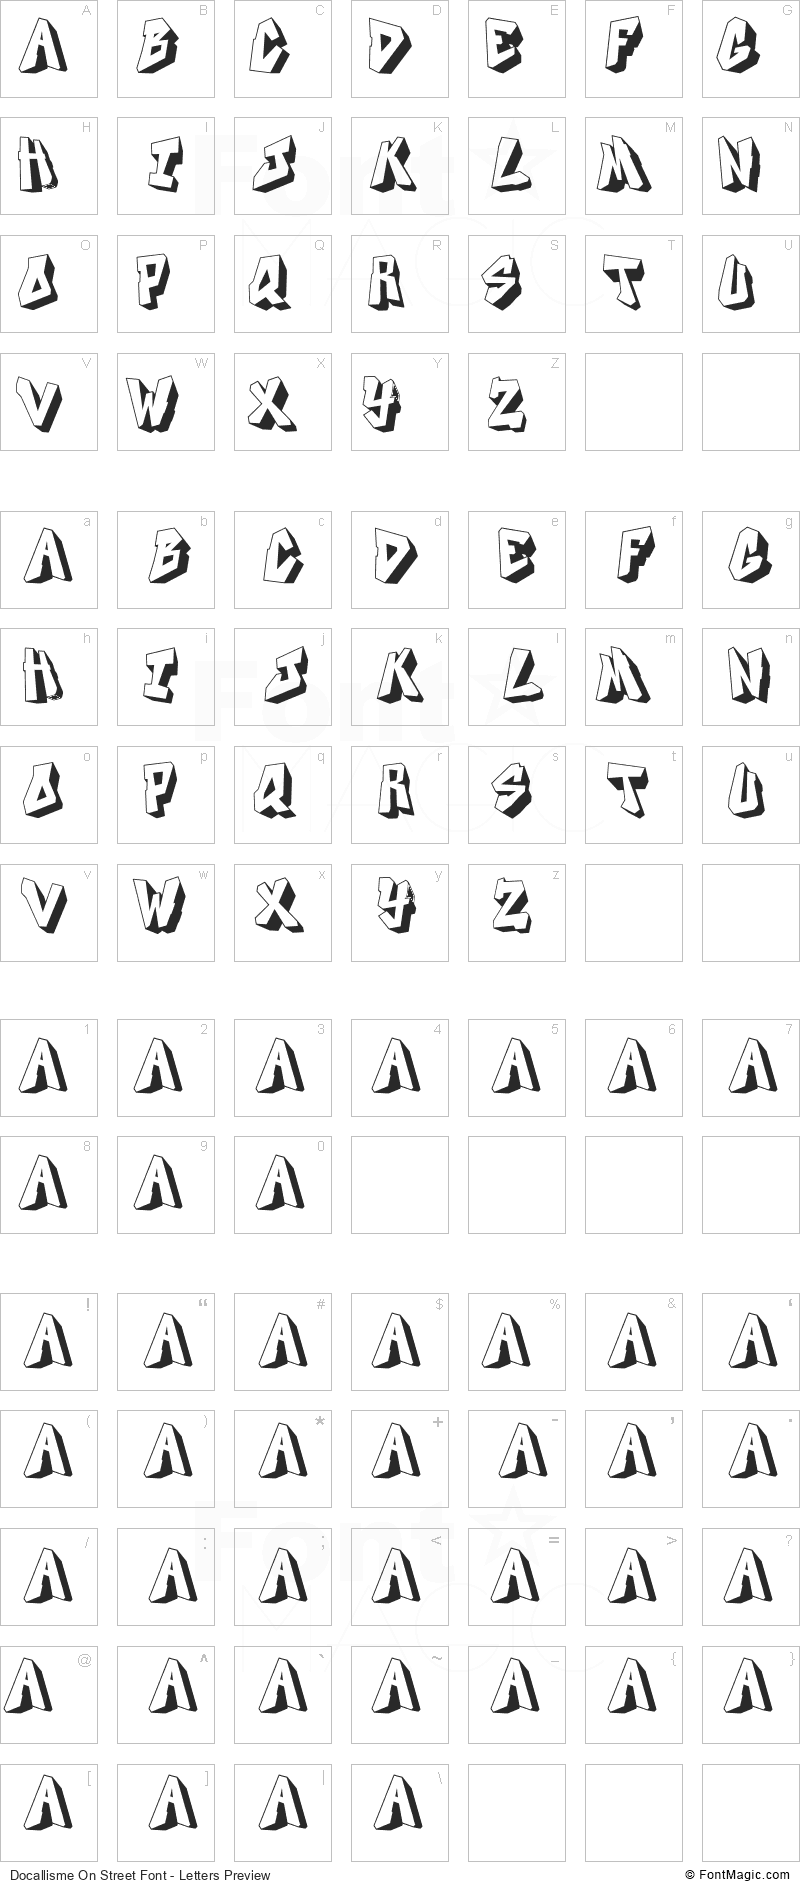 Docallisme On Street Font - All Latters Preview Chart